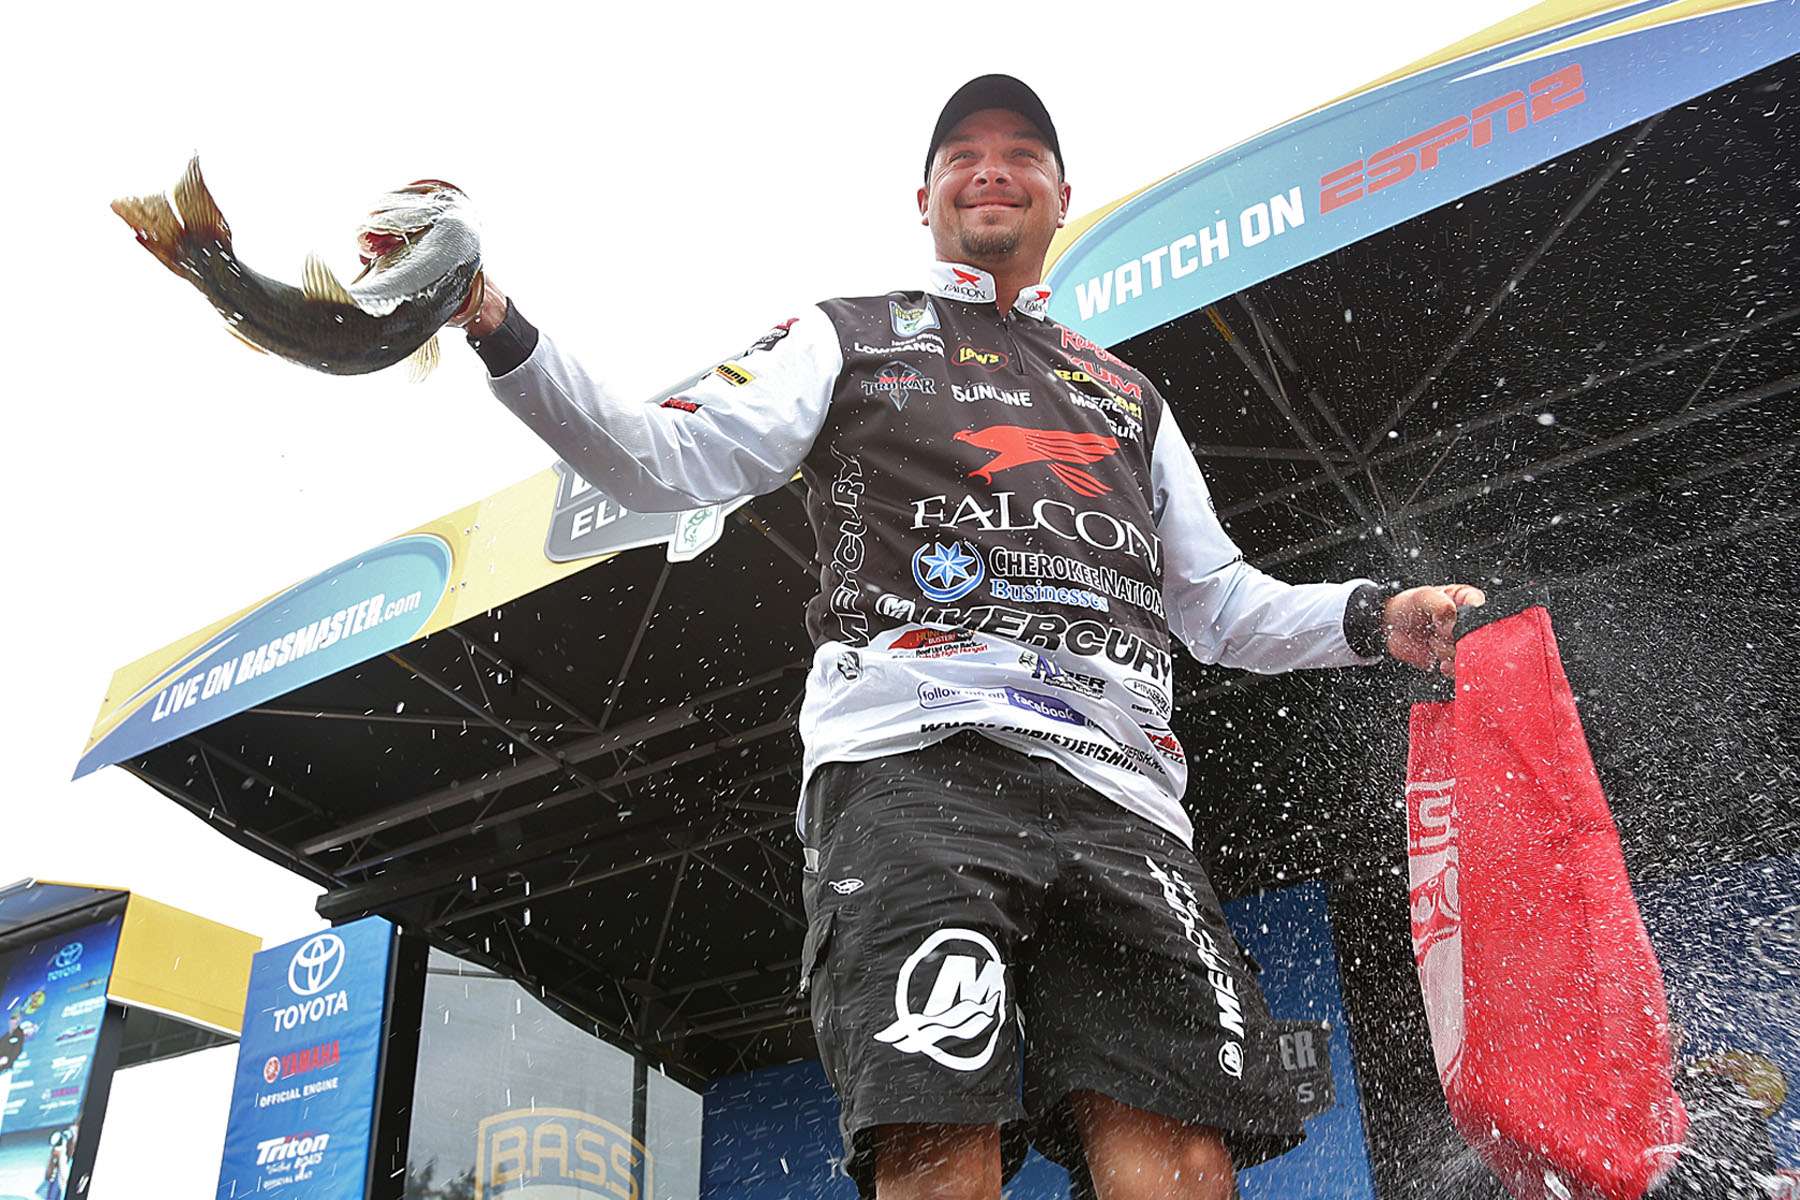 Christie qualified for the 2015 GEICO Bassmaster Classic with a narrow, 4-ounce victory over Gerald Swindle in the Elite Series event at Arkansas' Lake Dardanelle last May. Even if he hadn't won the tournament, Christie would have qualified based on his 15th-place finish in the Toyota Angler of the Year standings.